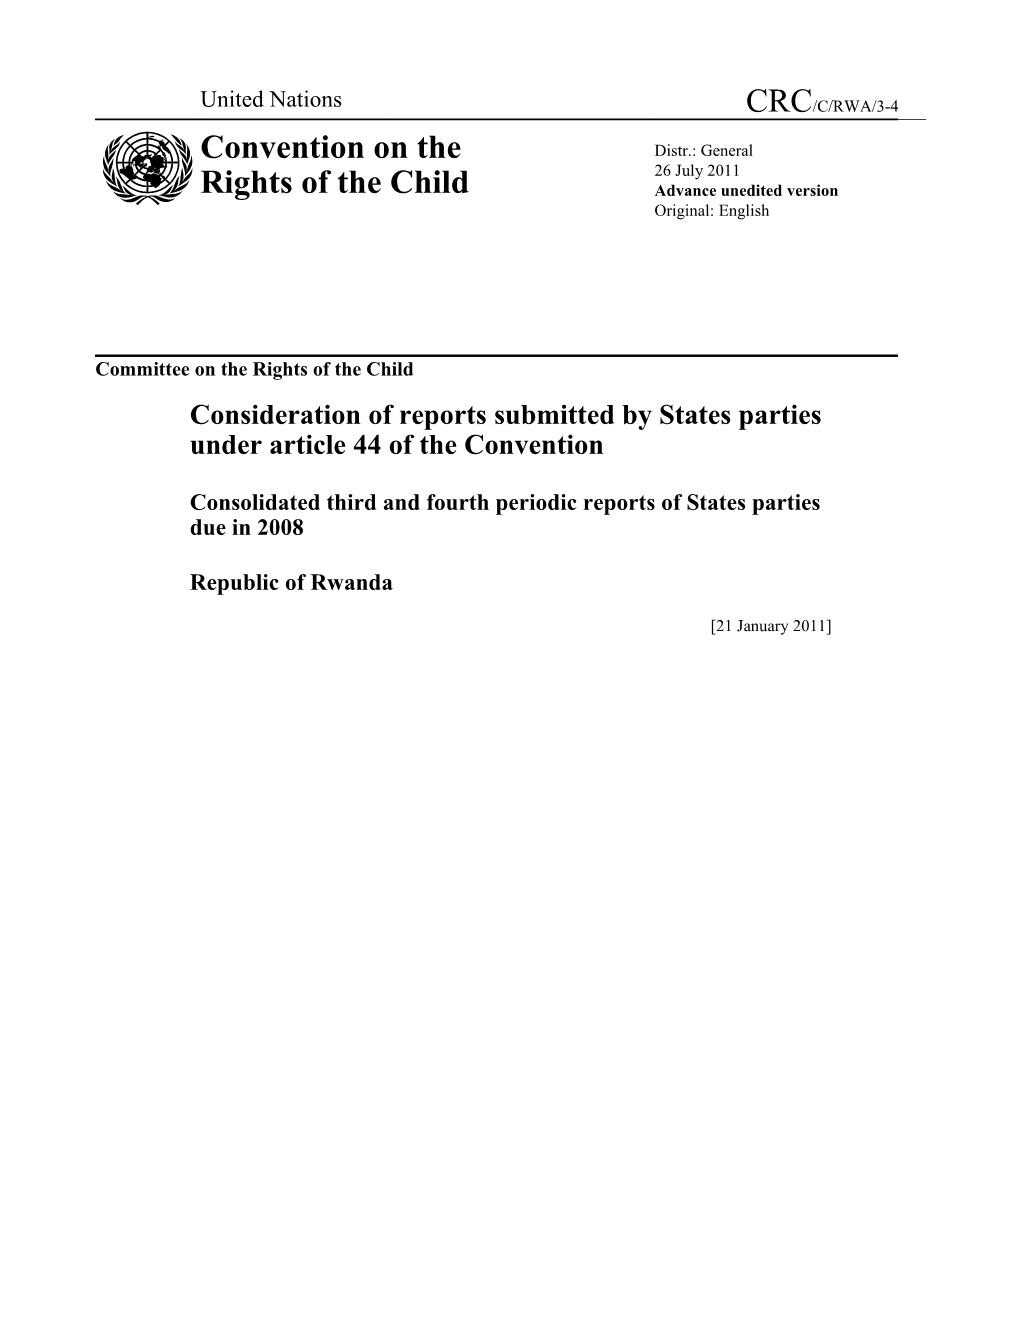 Committee on the Rights of the Child s1